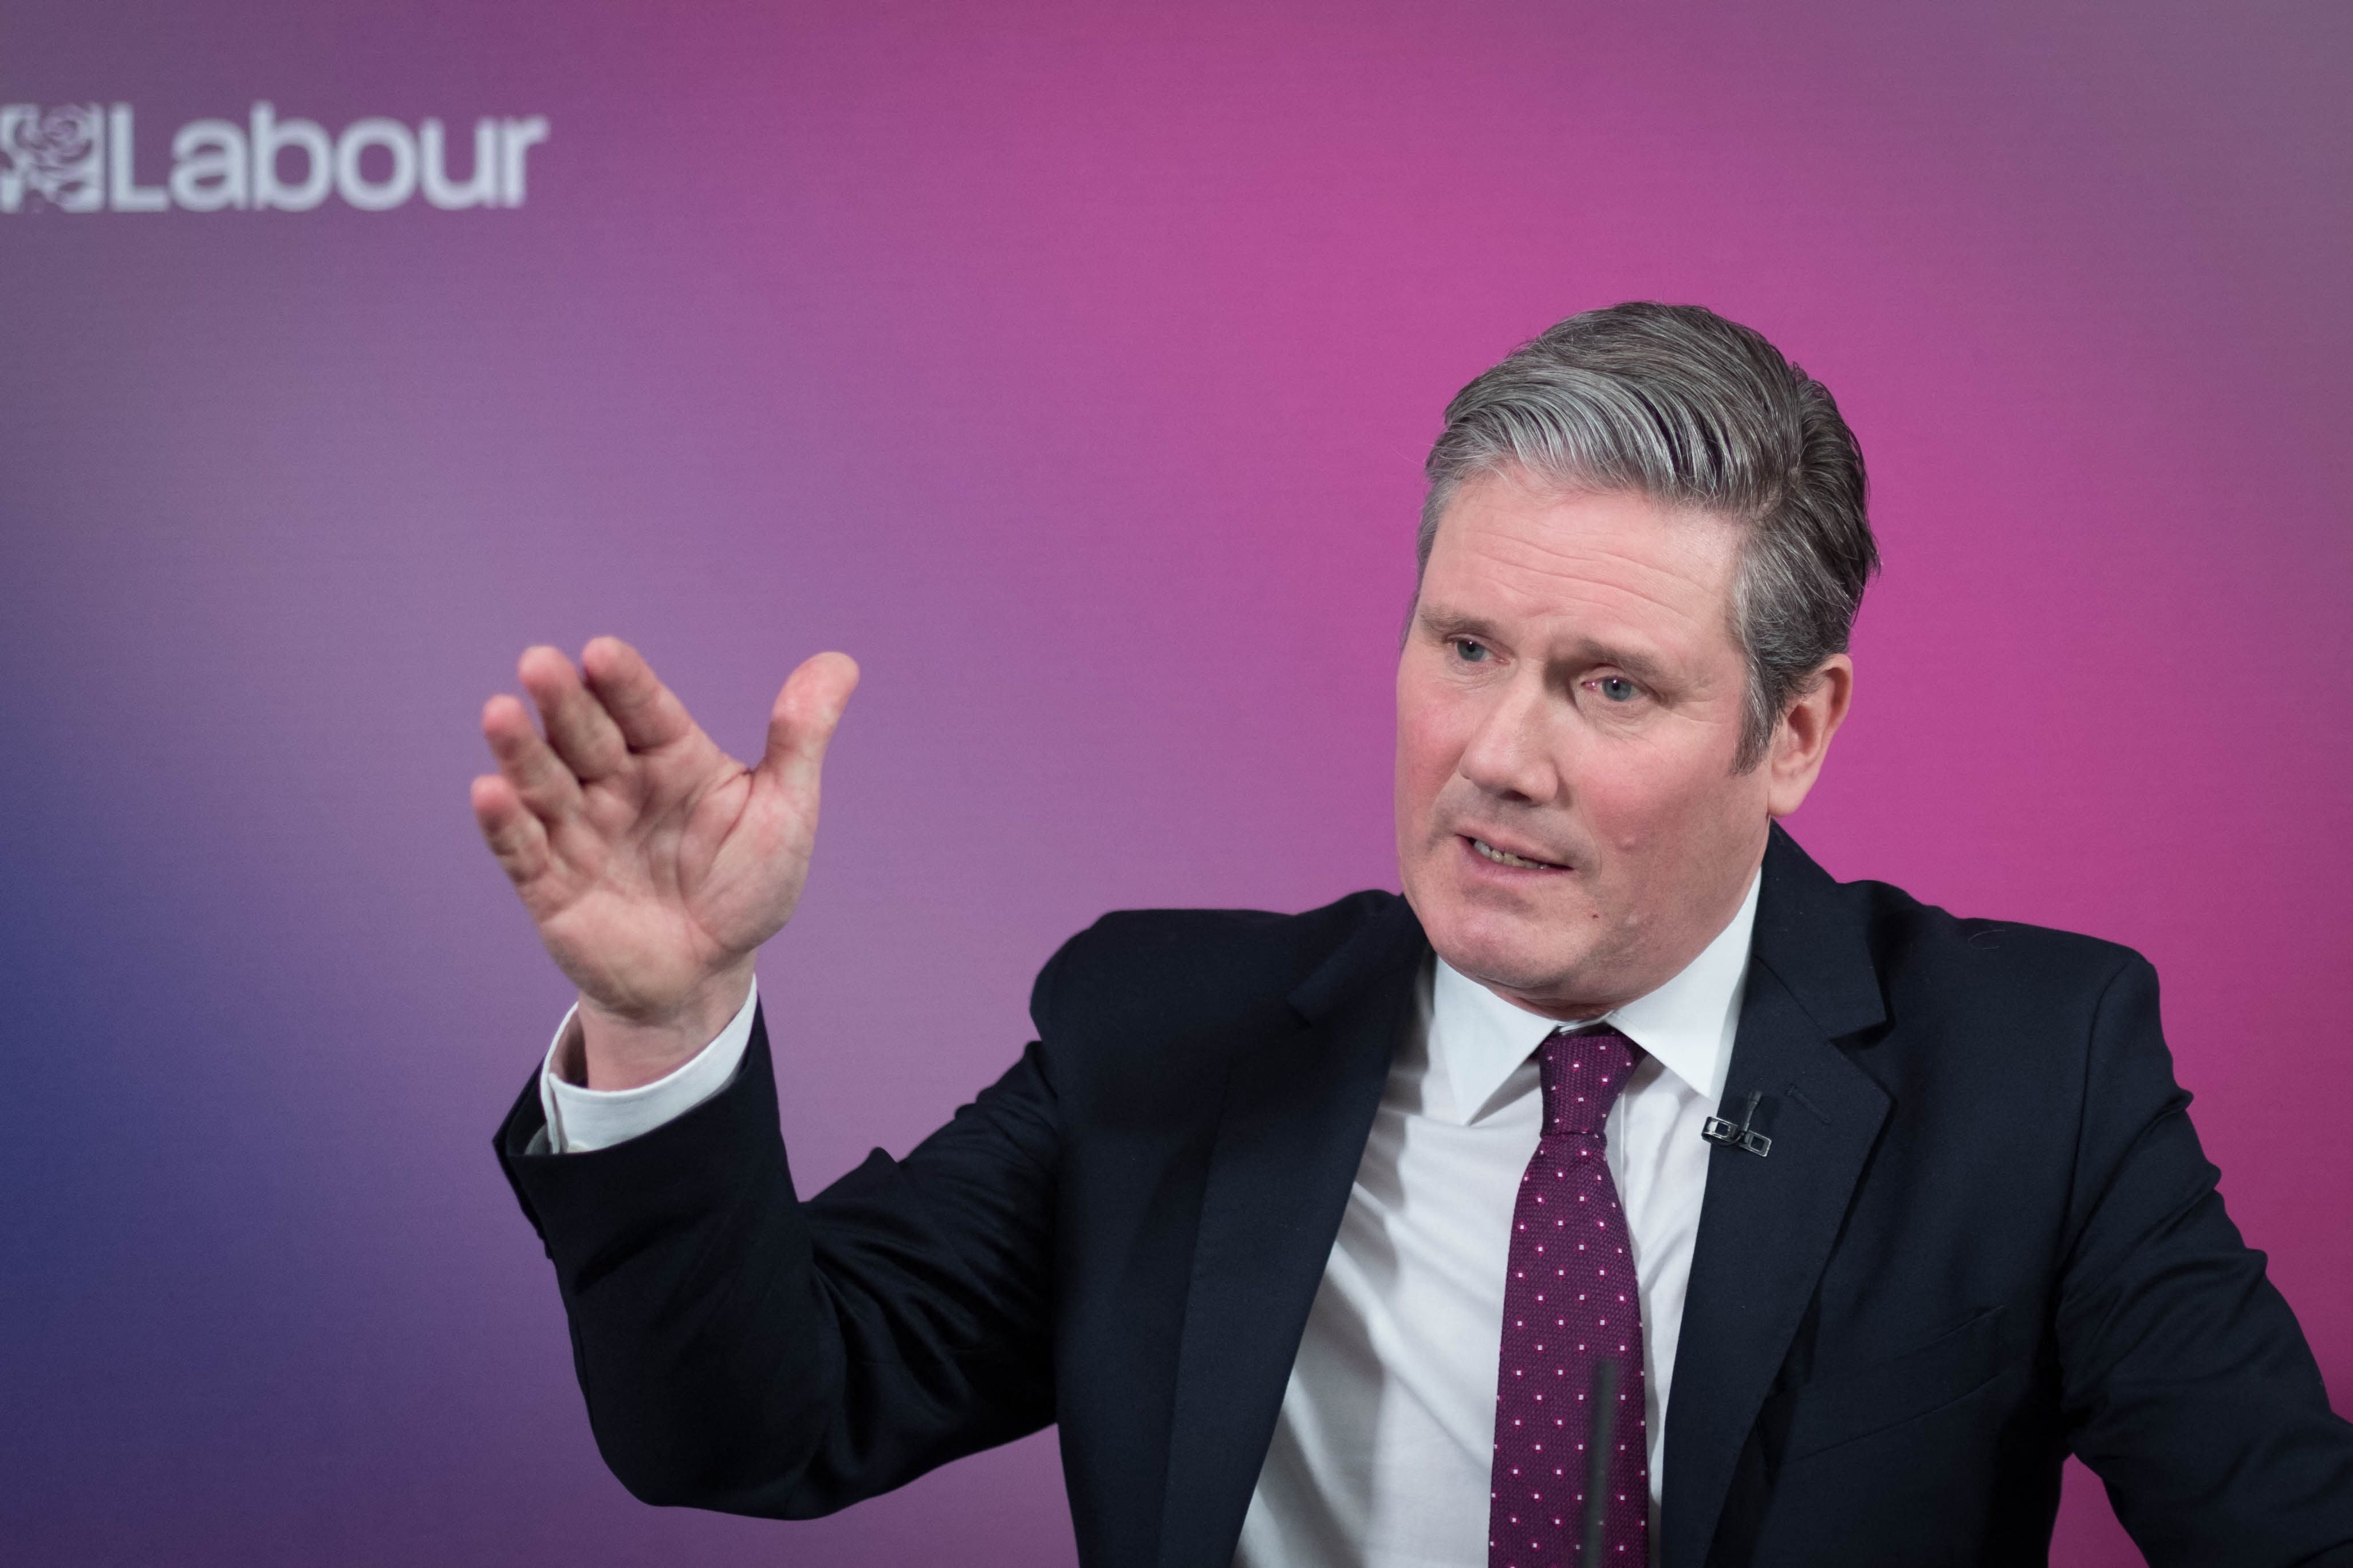 Keir Starmer faces a tough electoral test on 6 May